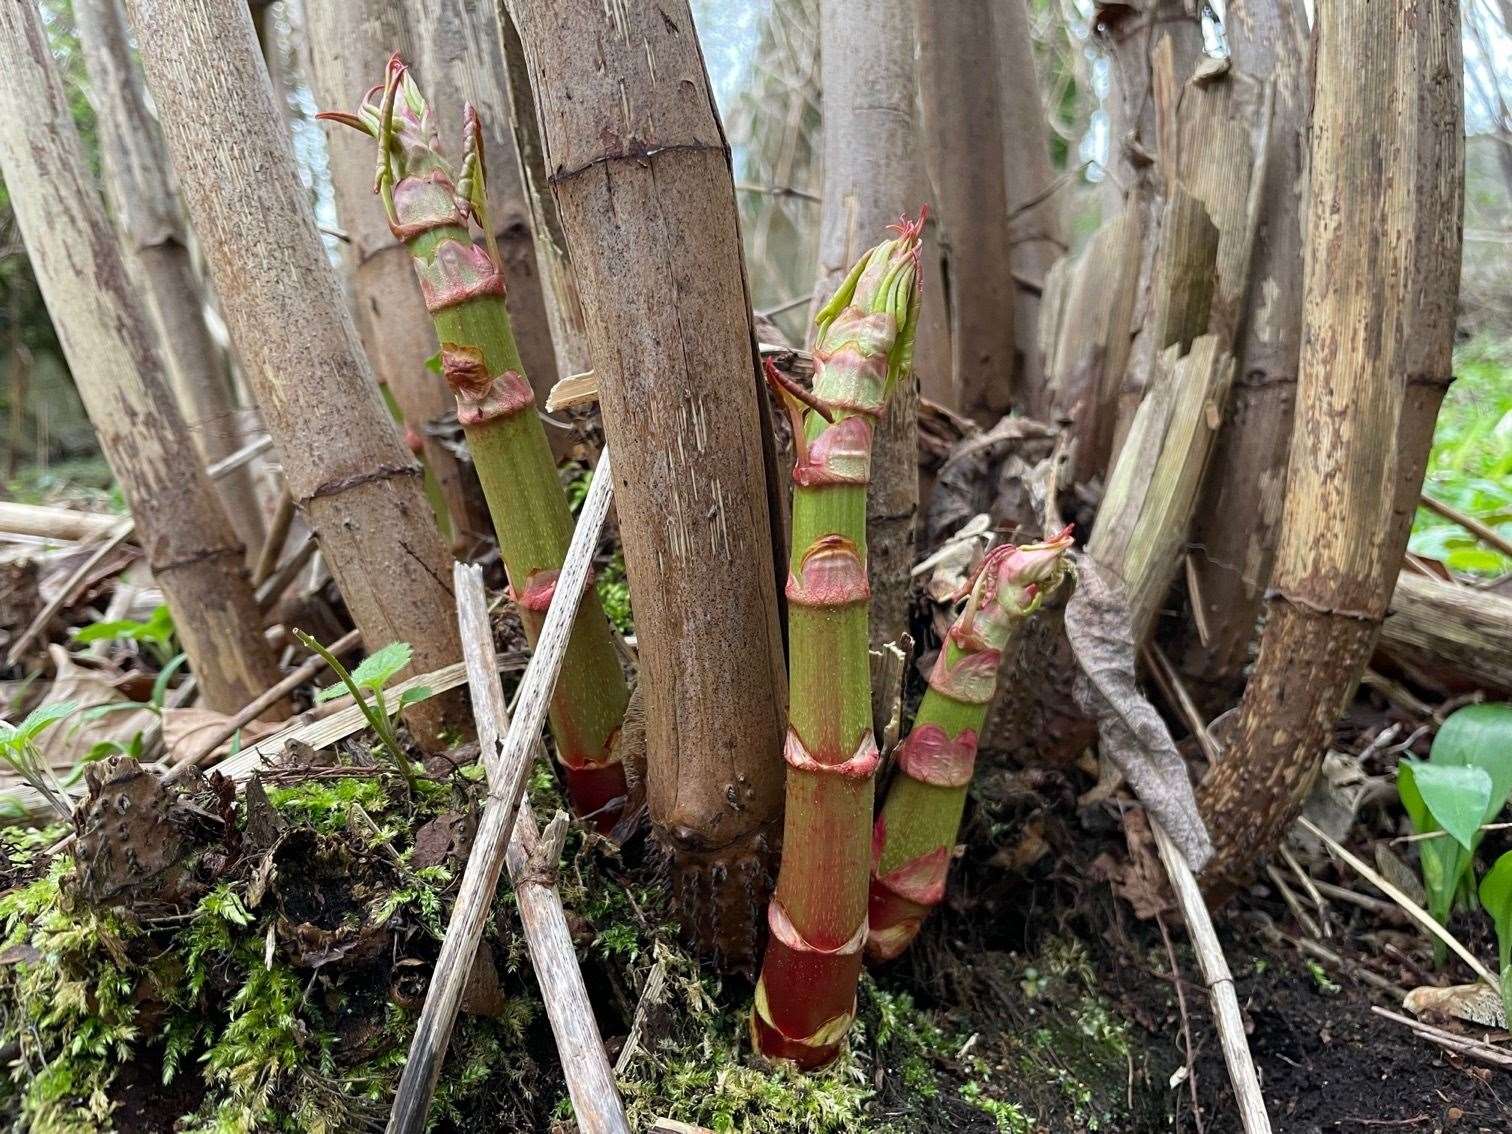 Japanese Knotweed has distinctive red stems. Picture: PCA